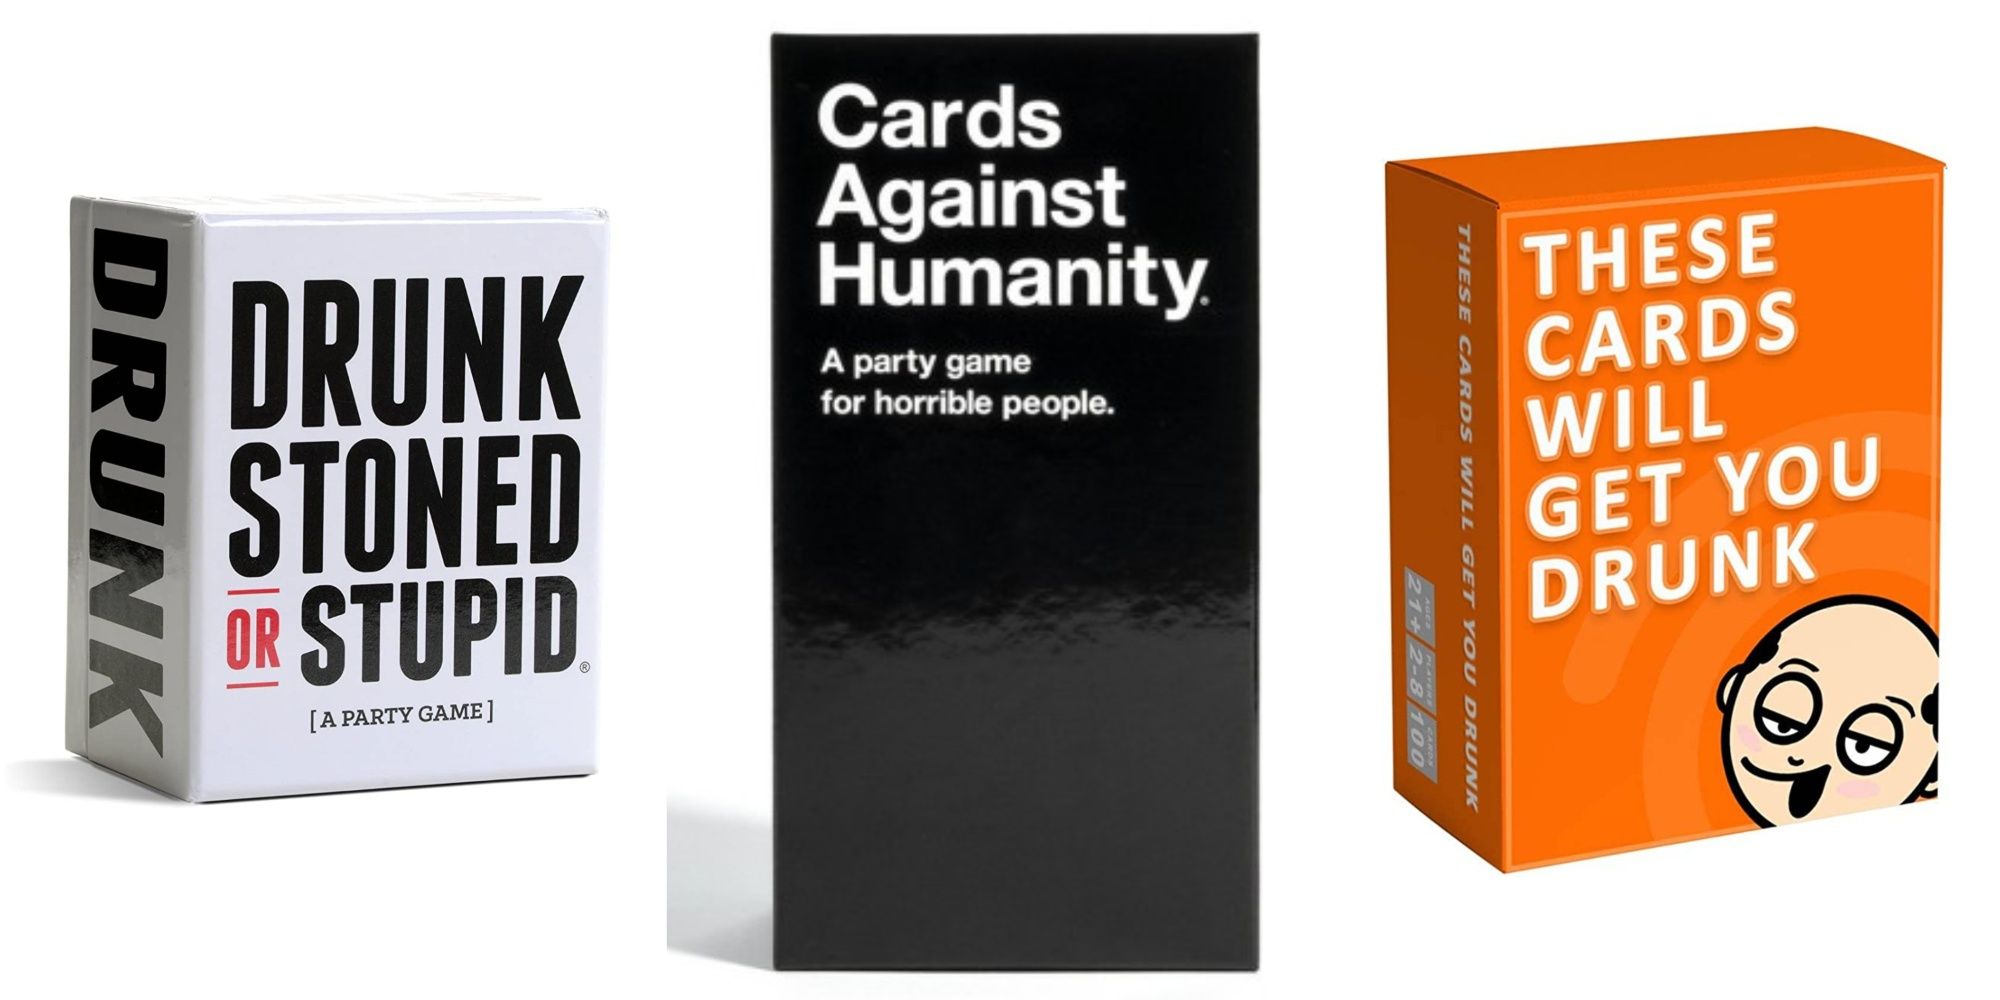 Best adult card games featuring Drunk Stoned or Stupid, Cards Against Humanity, and These Cards Will Get You Drunk